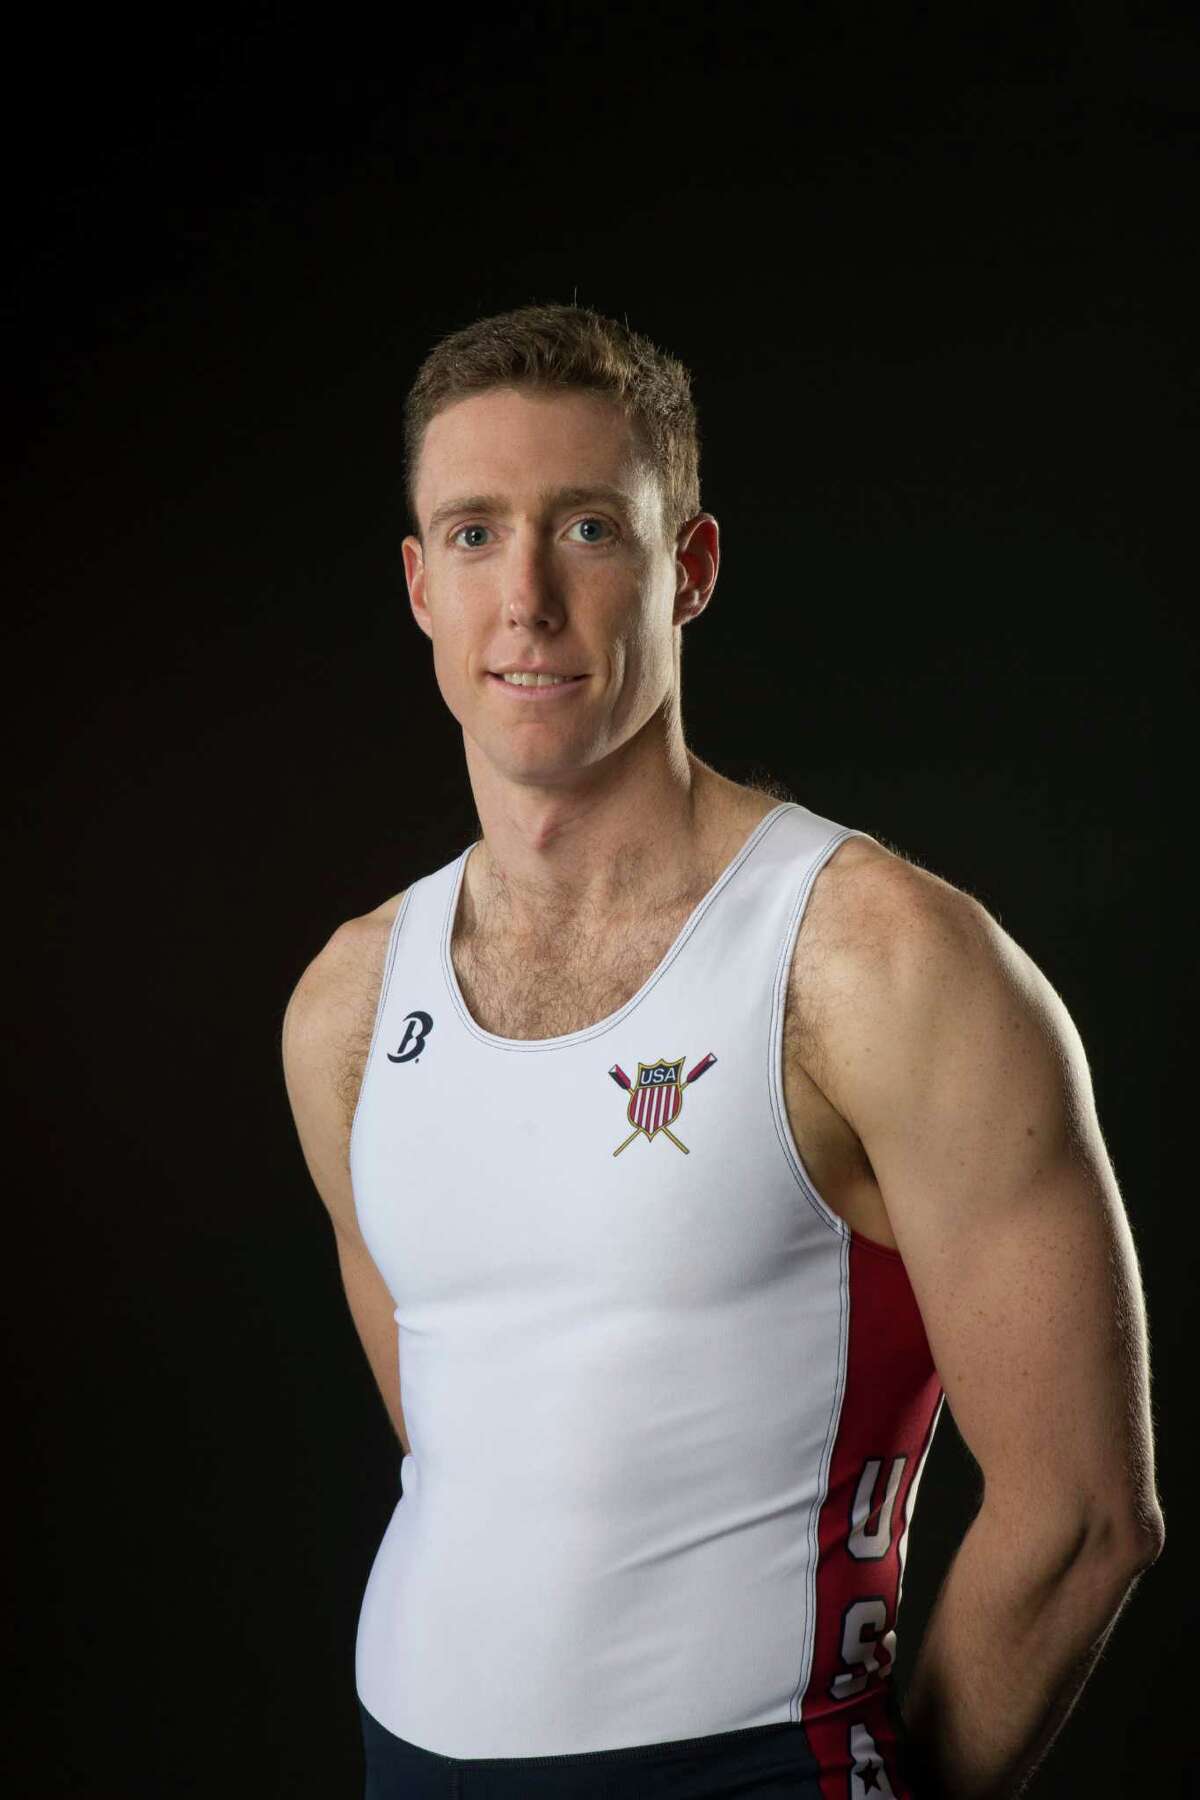 United States rower Charlie Cole.